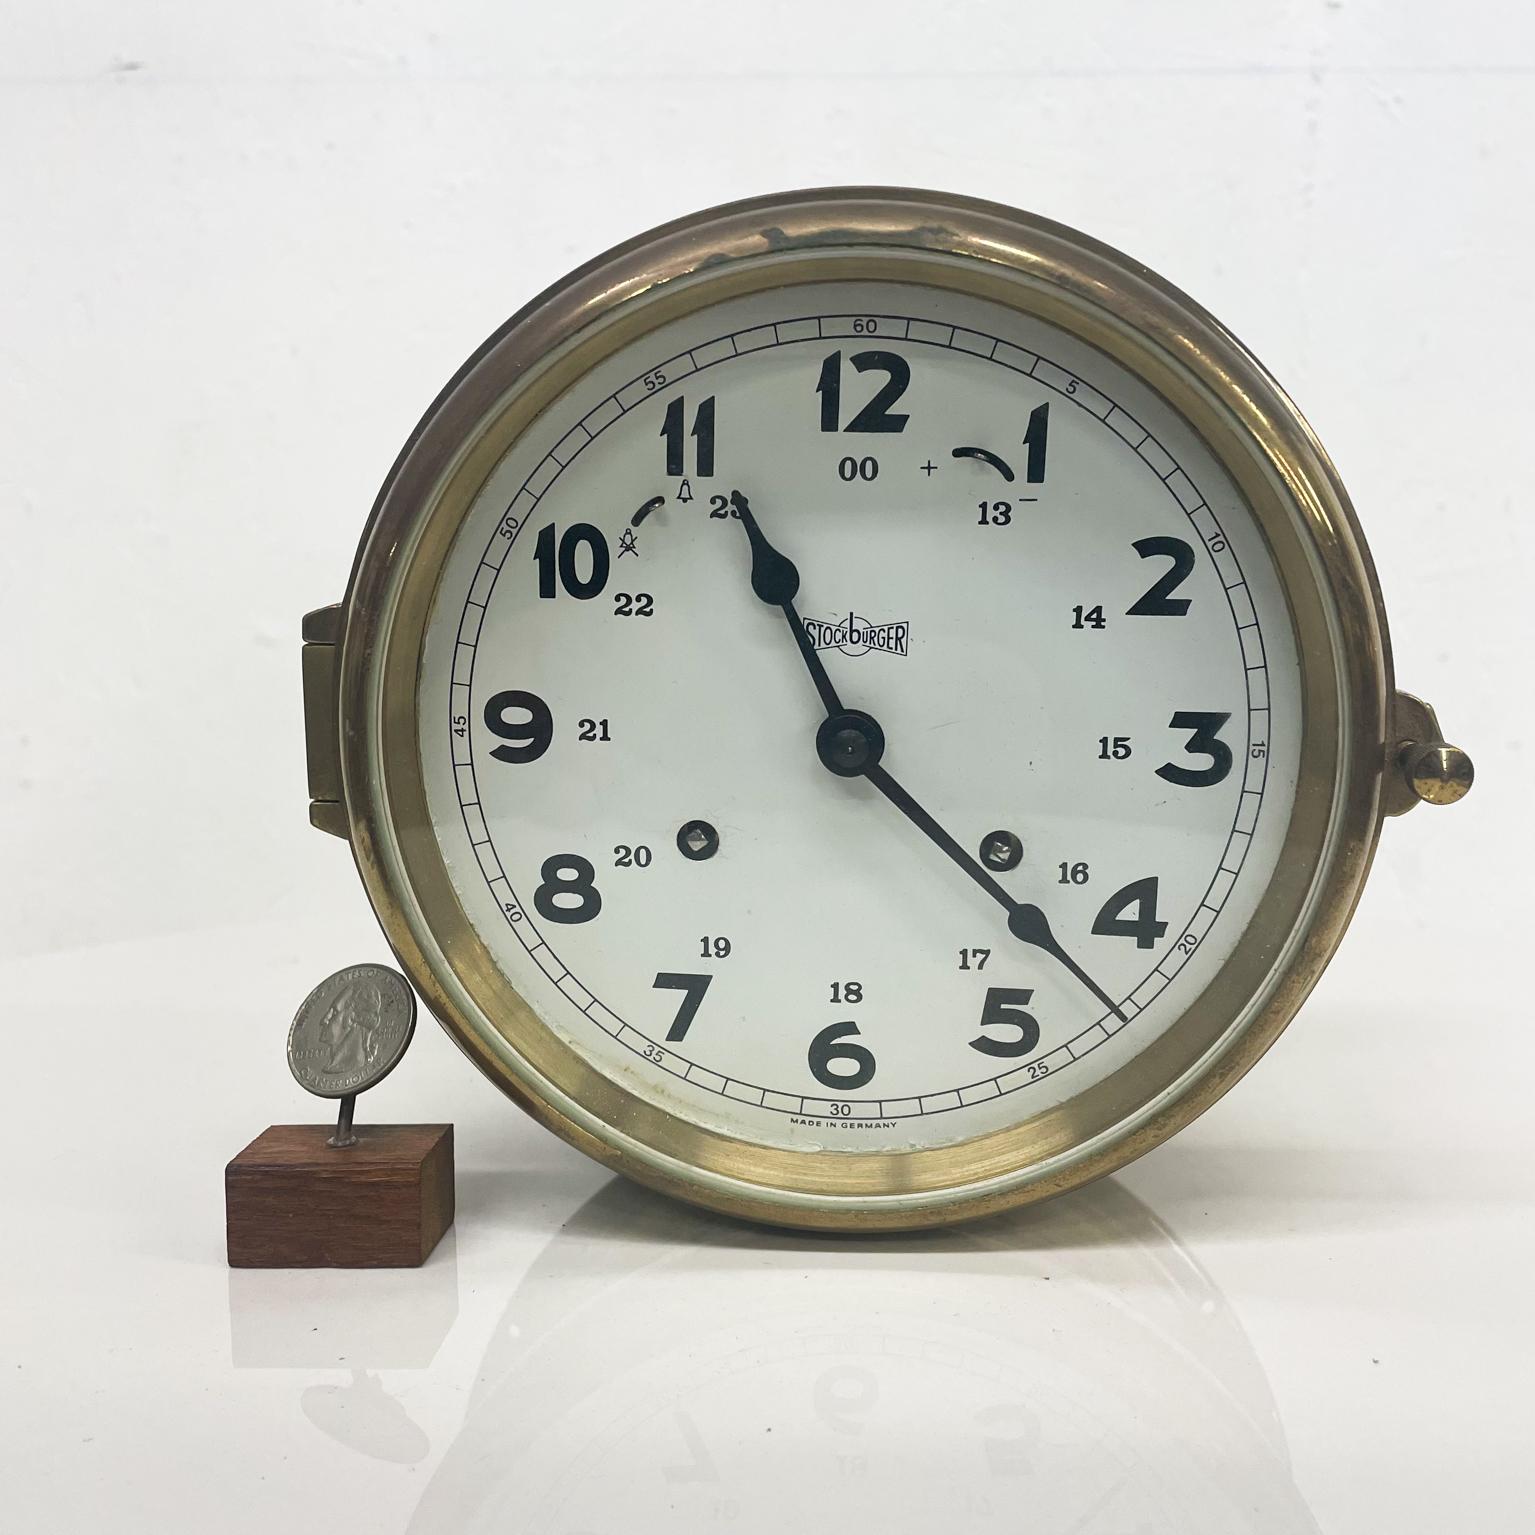 Marine Clock
1960s by Stockburger maritime round brass nautical ship's bell clock West Germany 
Mechanical with winding key
7.5 diameter x 3.75 d
Preowned vintage unrestored condition.
Refer to images.
 